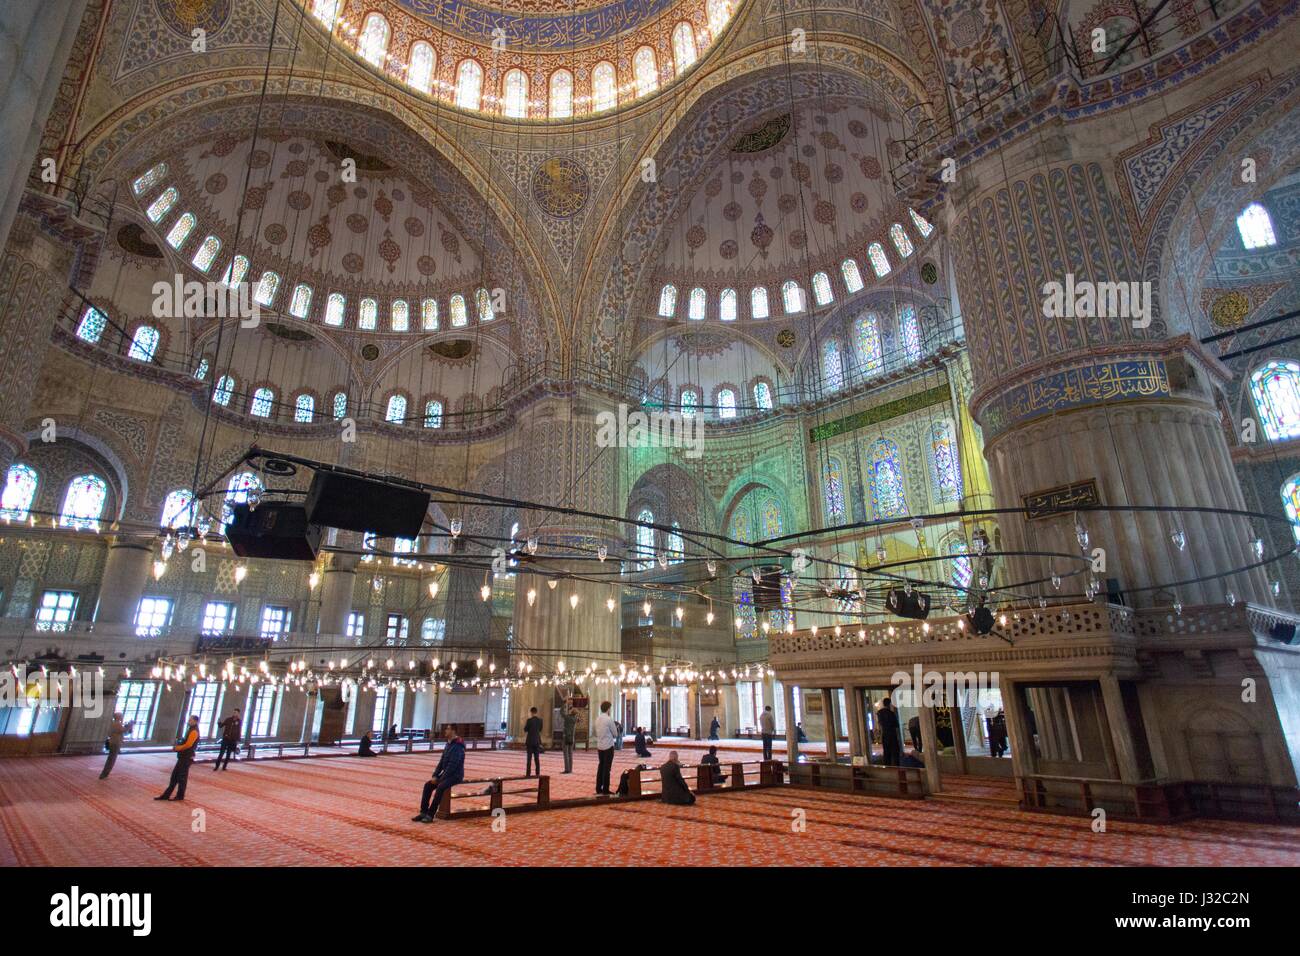 Sultan ahmed mosque